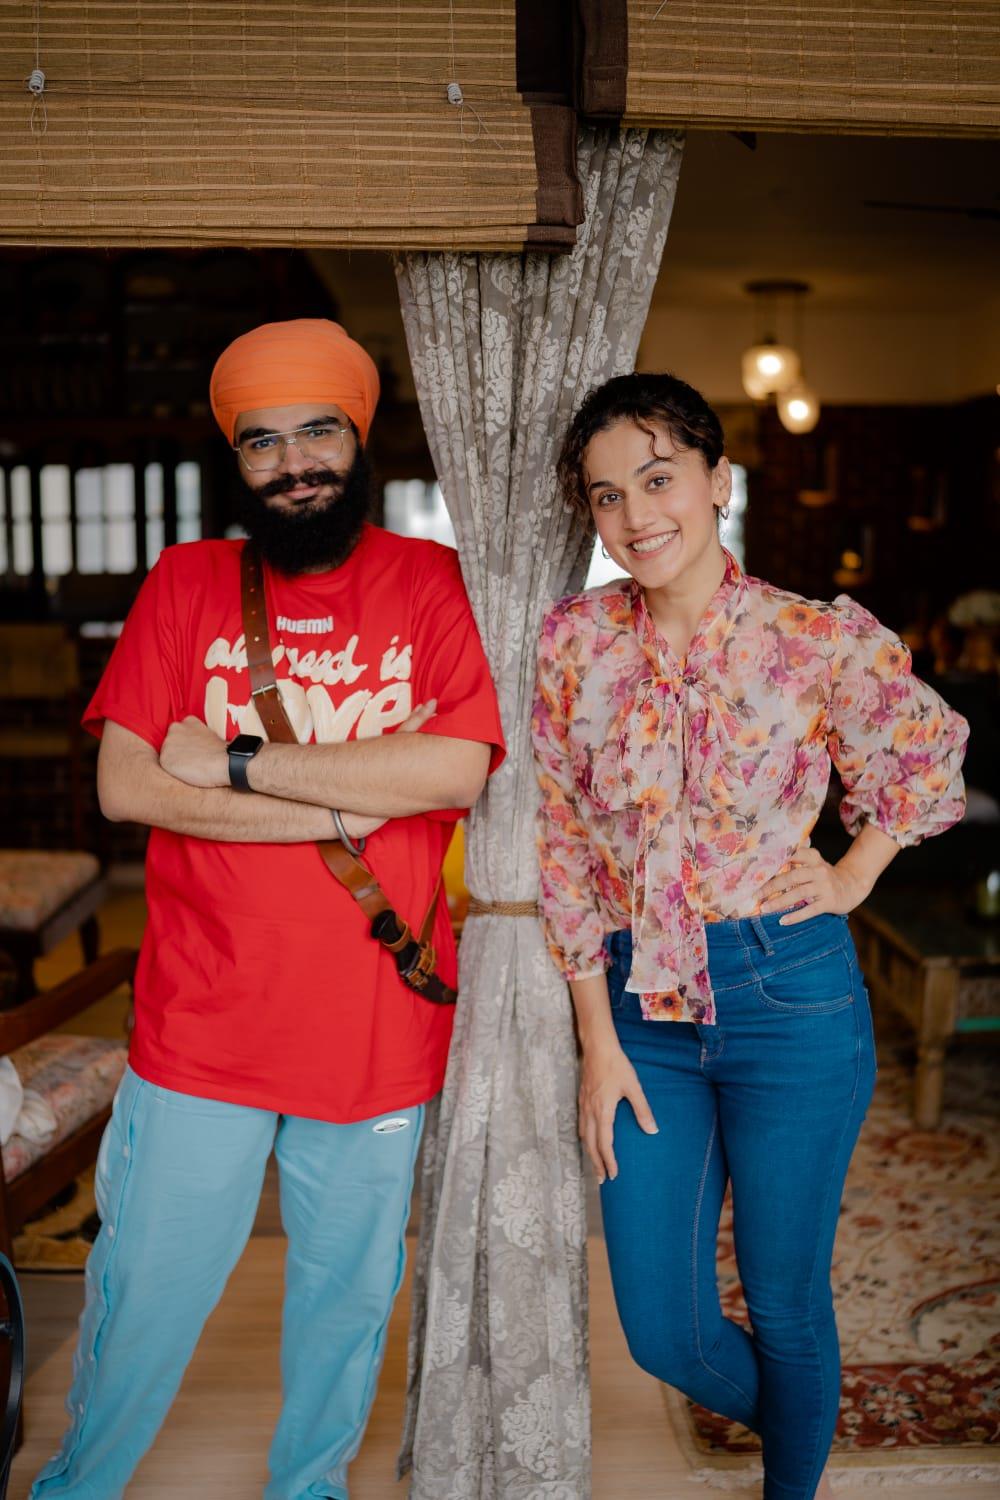 Watch: Taapsee Pannu joins hands with Hemkunt Foundation, becomes its first female ambassador